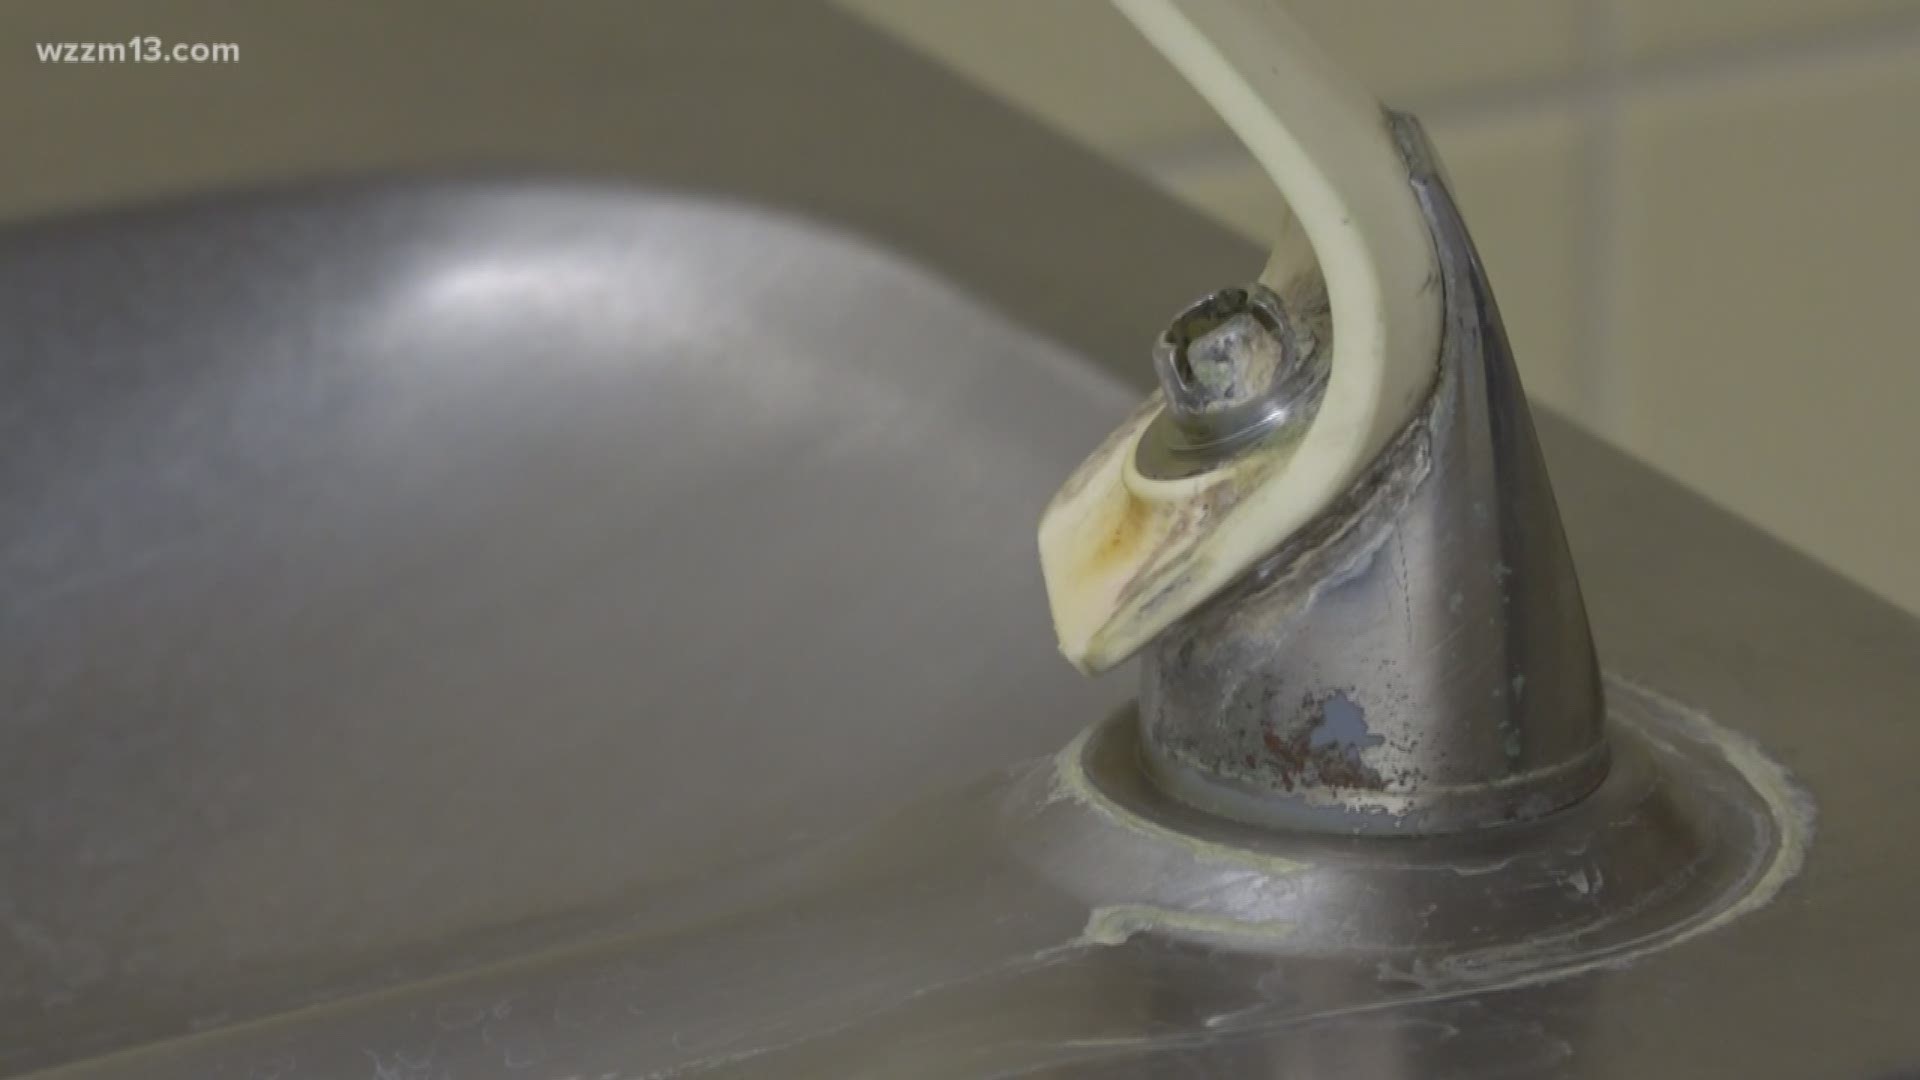 People with concerns about PFAS contamination and what officials are doing to clean-up can get their questions answered at a town hall meeting Thursday evening.